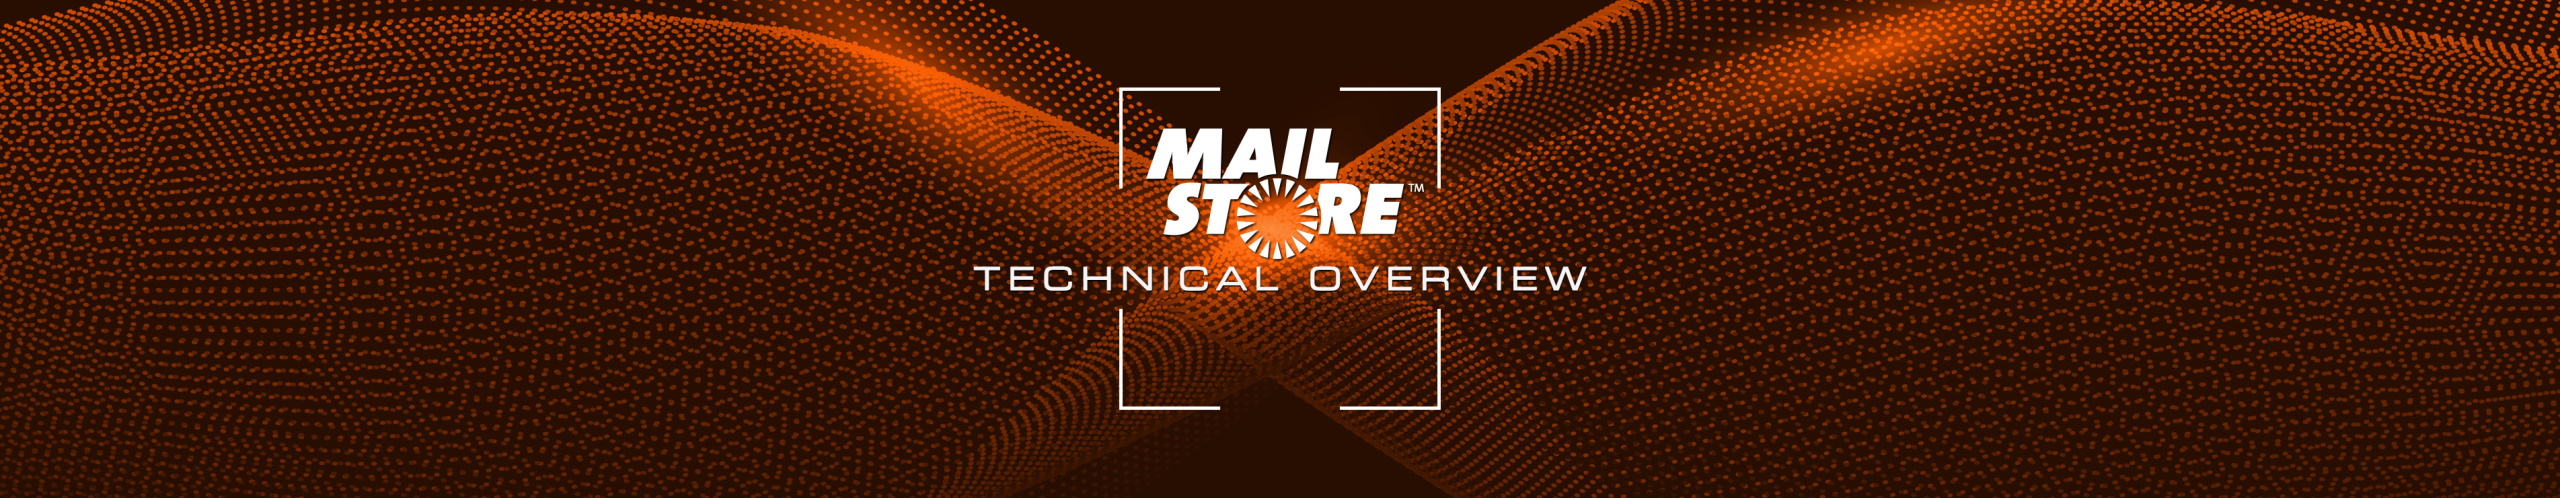 MailStore Technical Overview